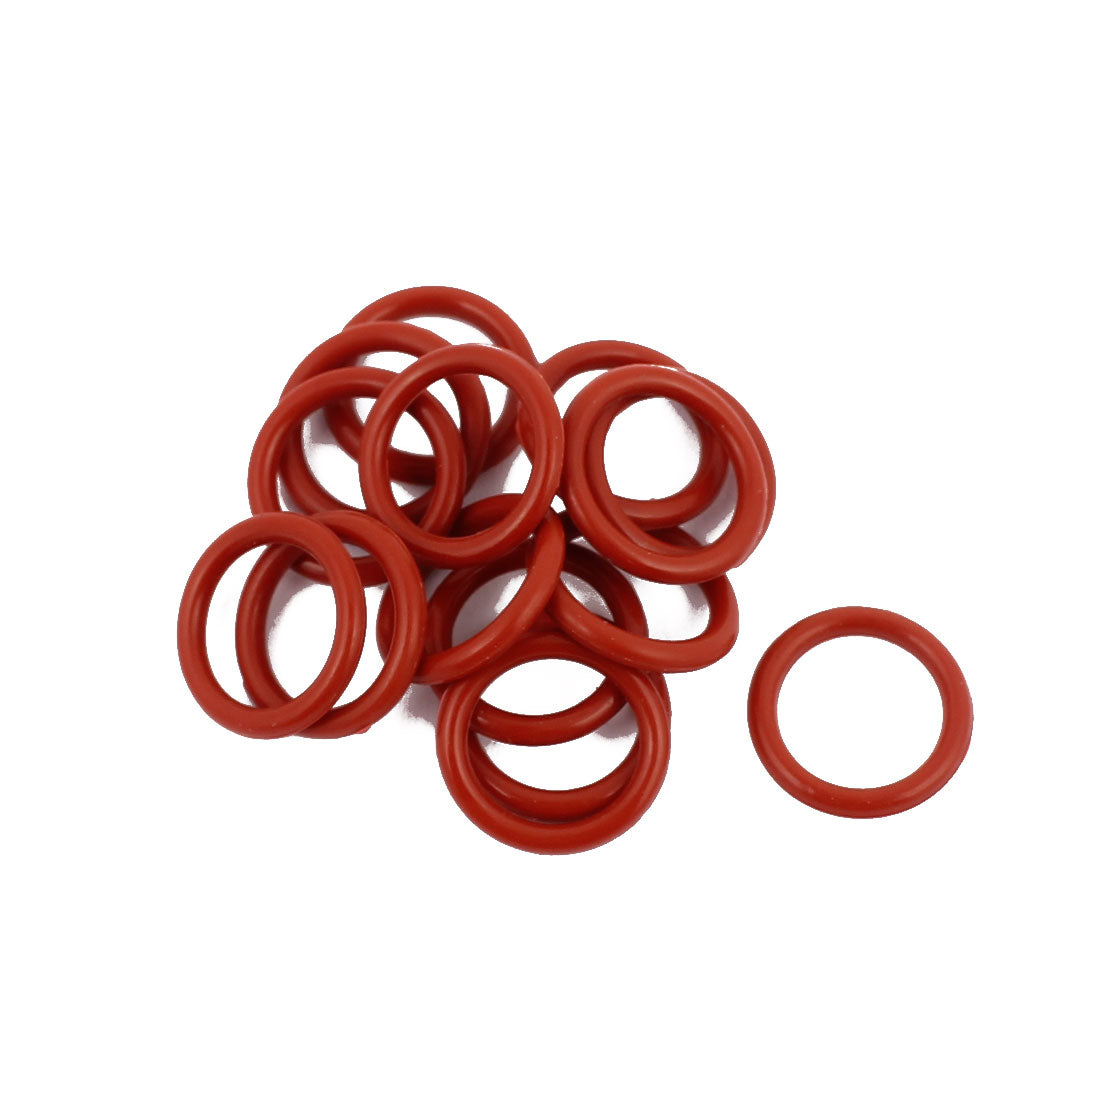 Uxcell Uxcell 15pcs 14mmx1.9mm Heat Resistant Silicone O Ring Oil Sealing Ring Gasket Red